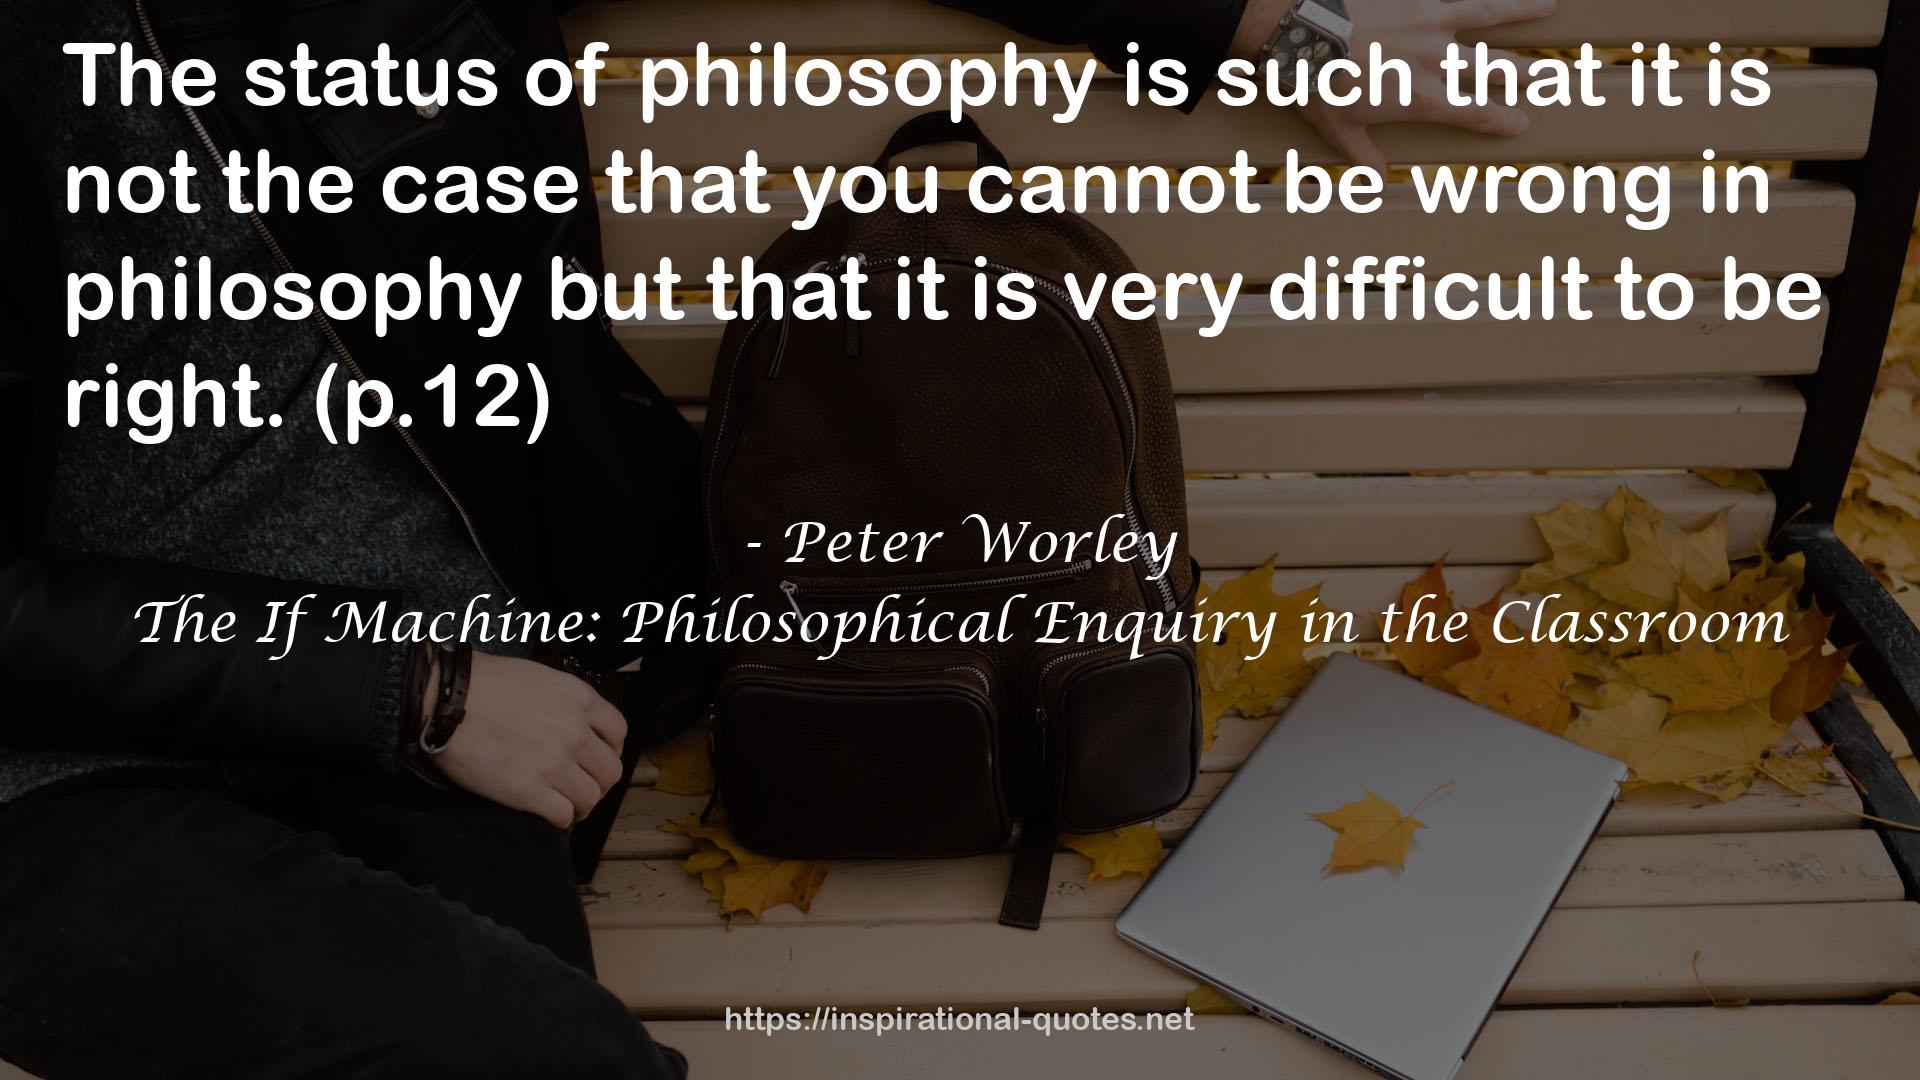 The If Machine: Philosophical Enquiry in the Classroom QUOTES